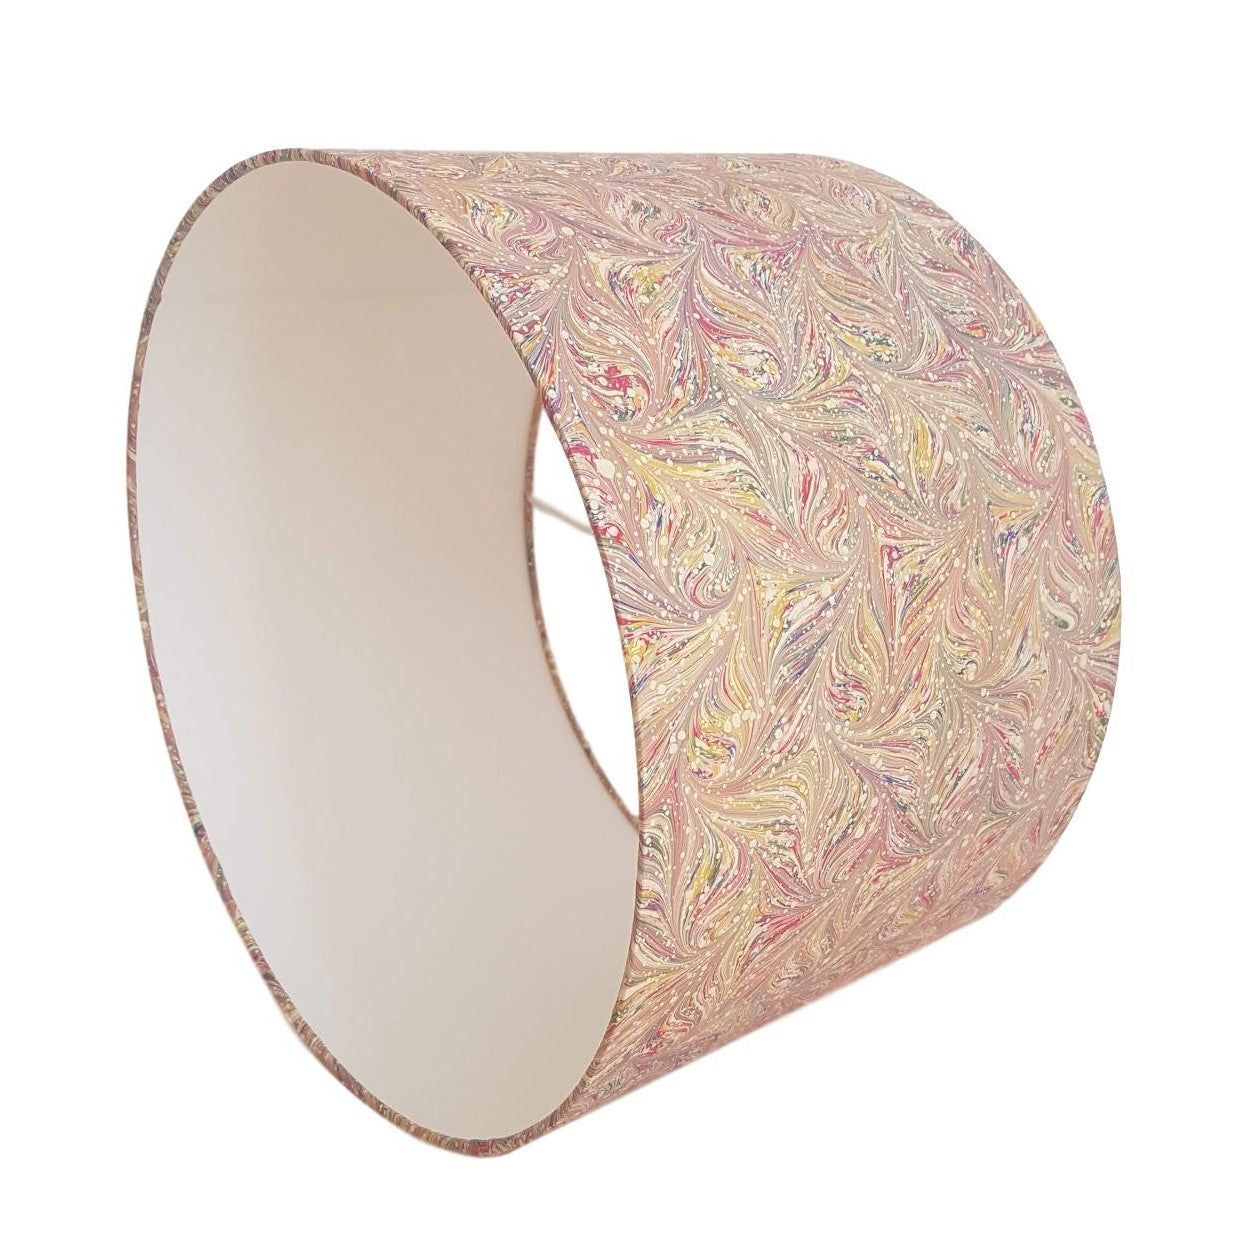 Munro and Kerr combed pink multicolour marbled paper tapered drum lampshade